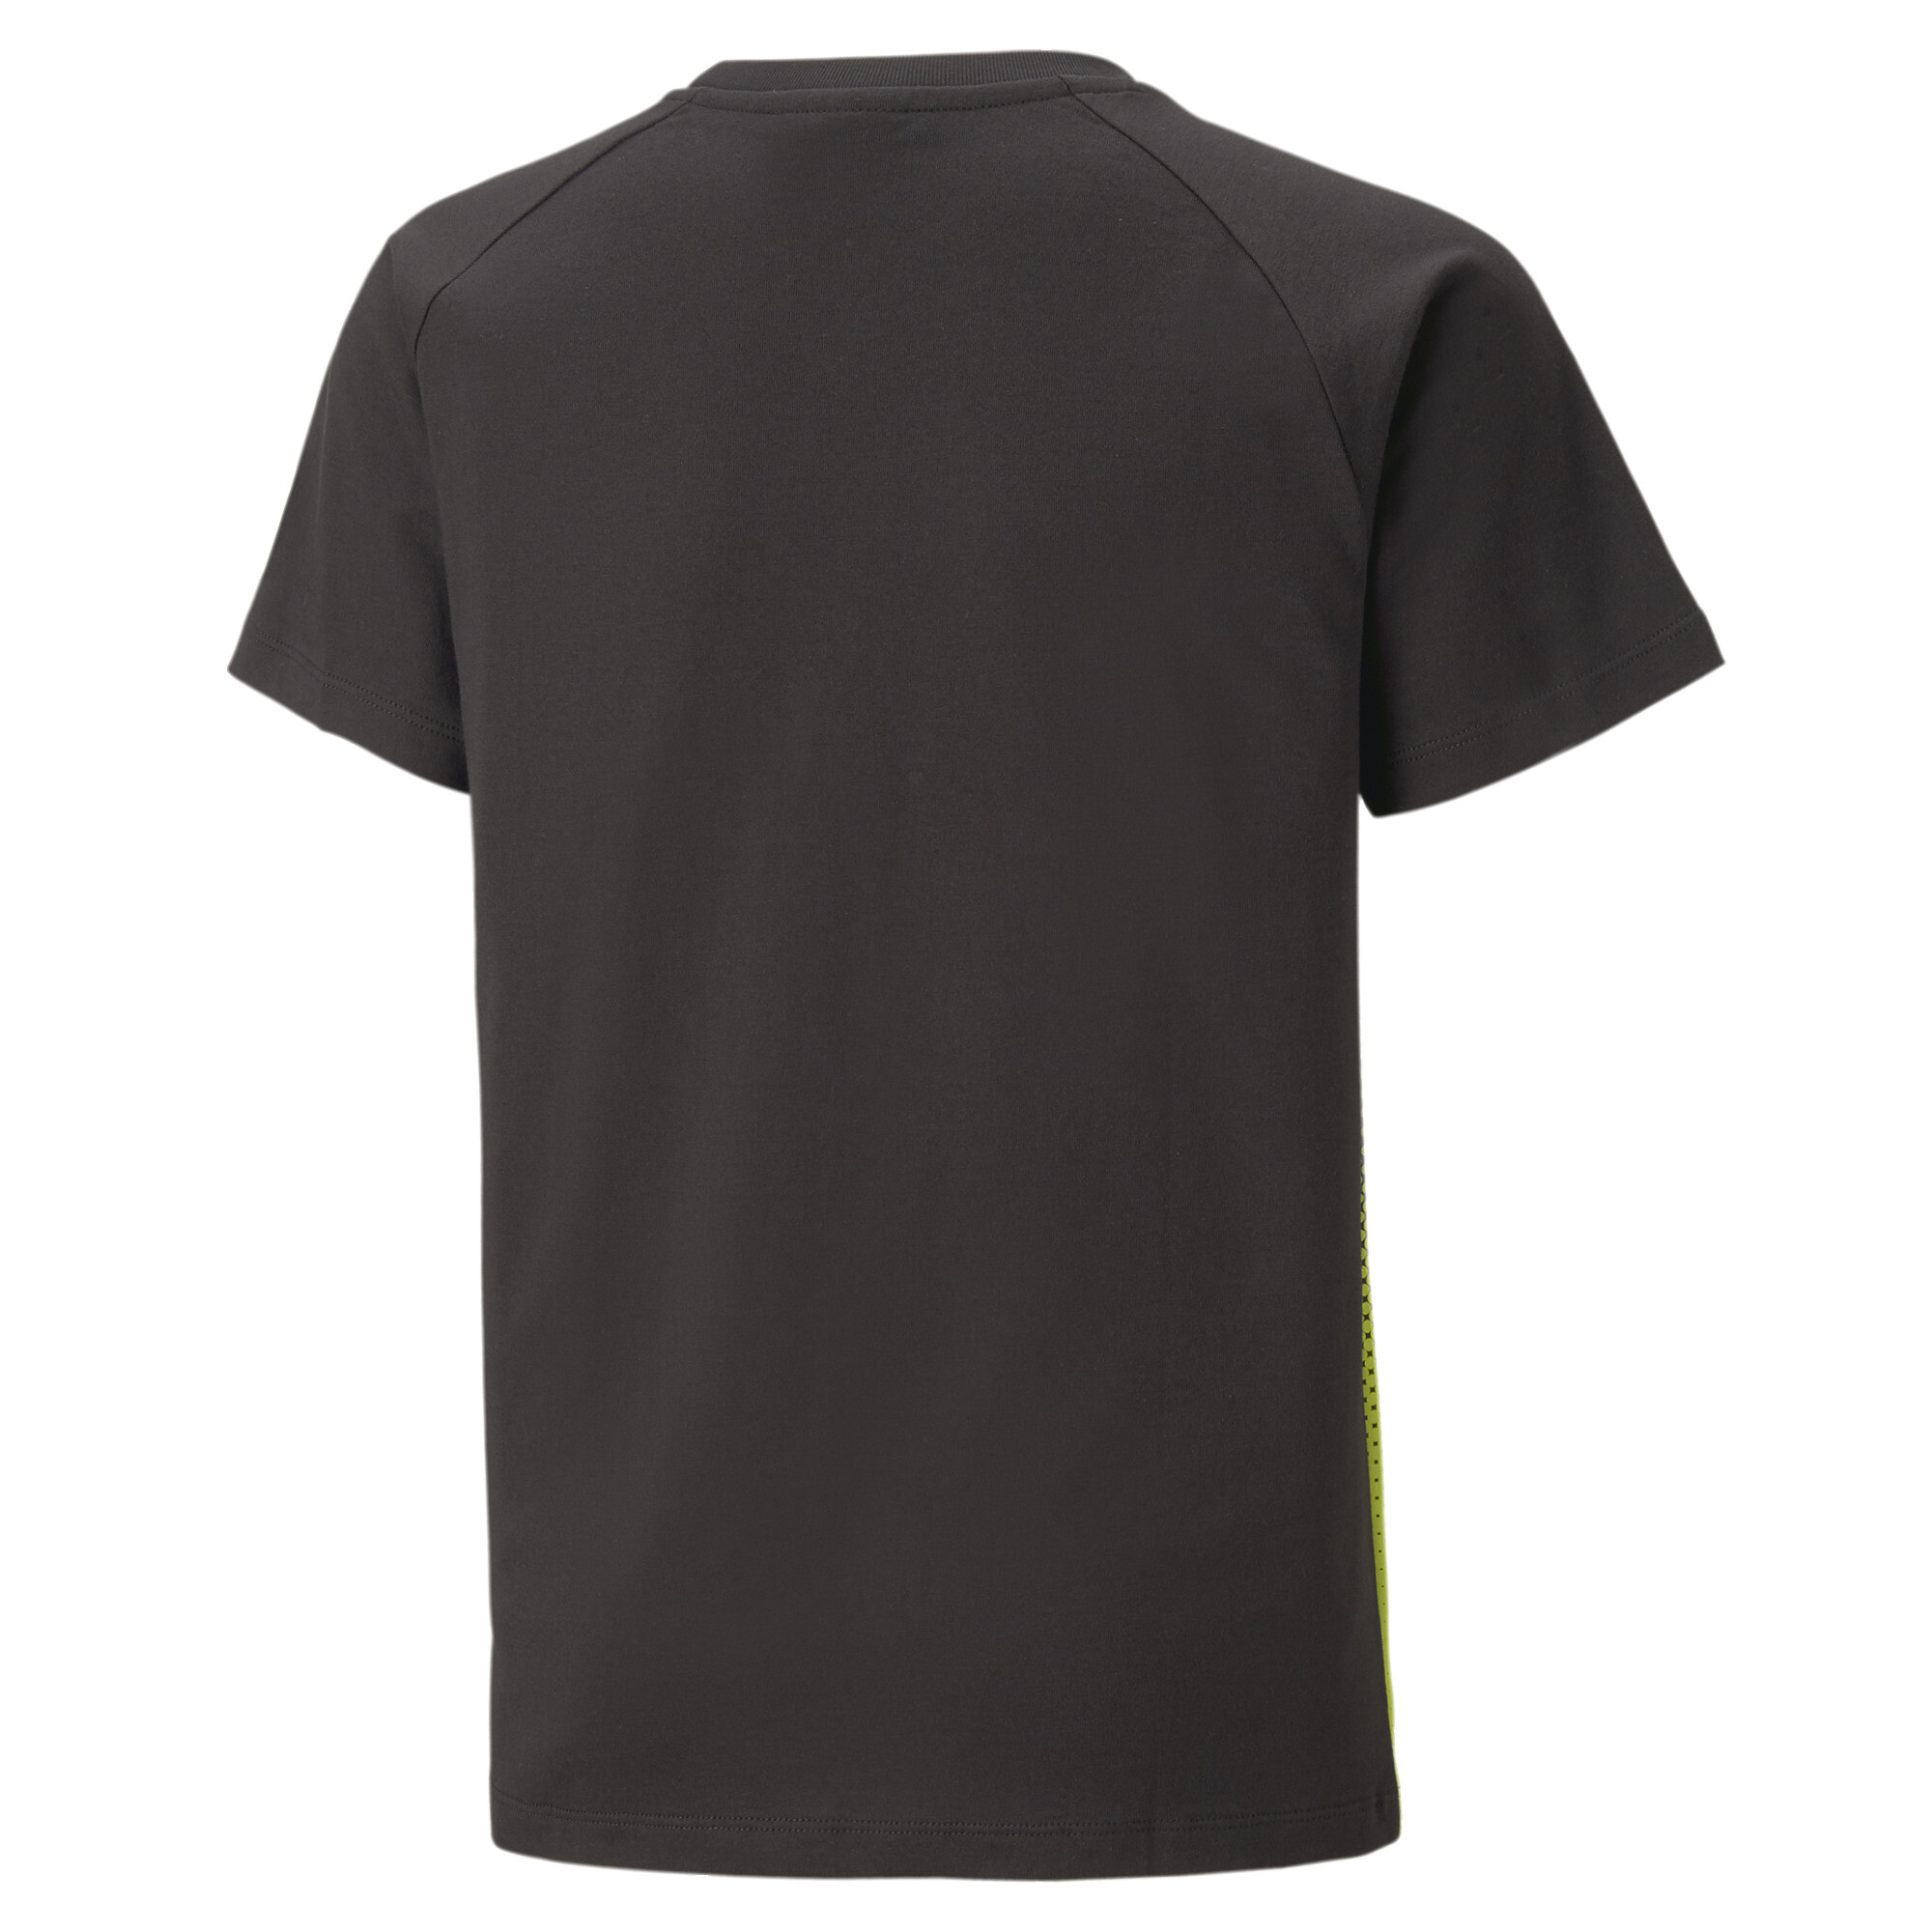 Puma X MIRACULOUS Tee Youth, Black, Size 15-16Y, Clothing